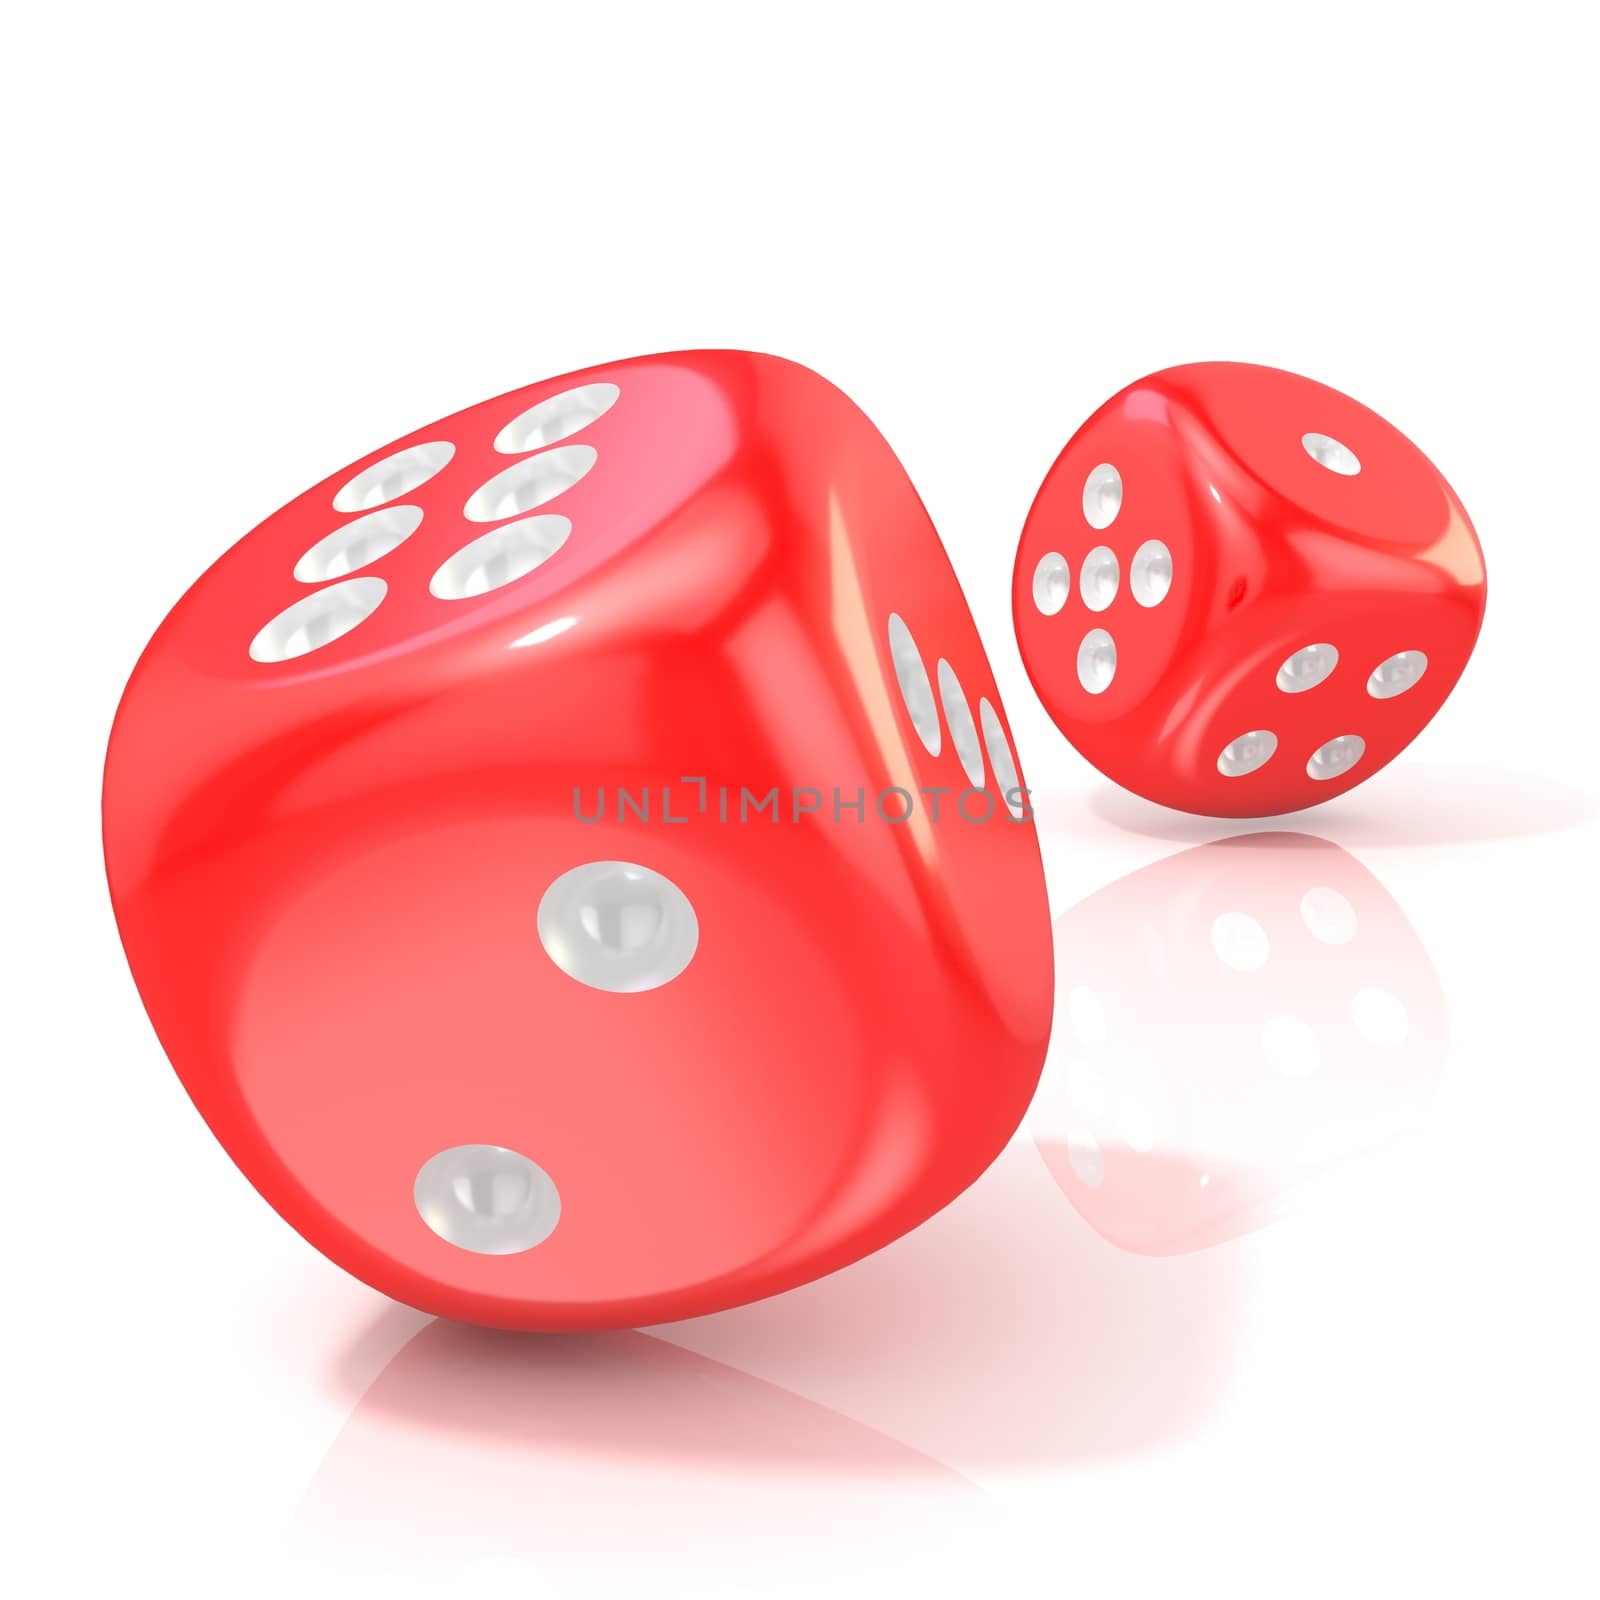 Two red game dices. 3D render illustration isolated on white background